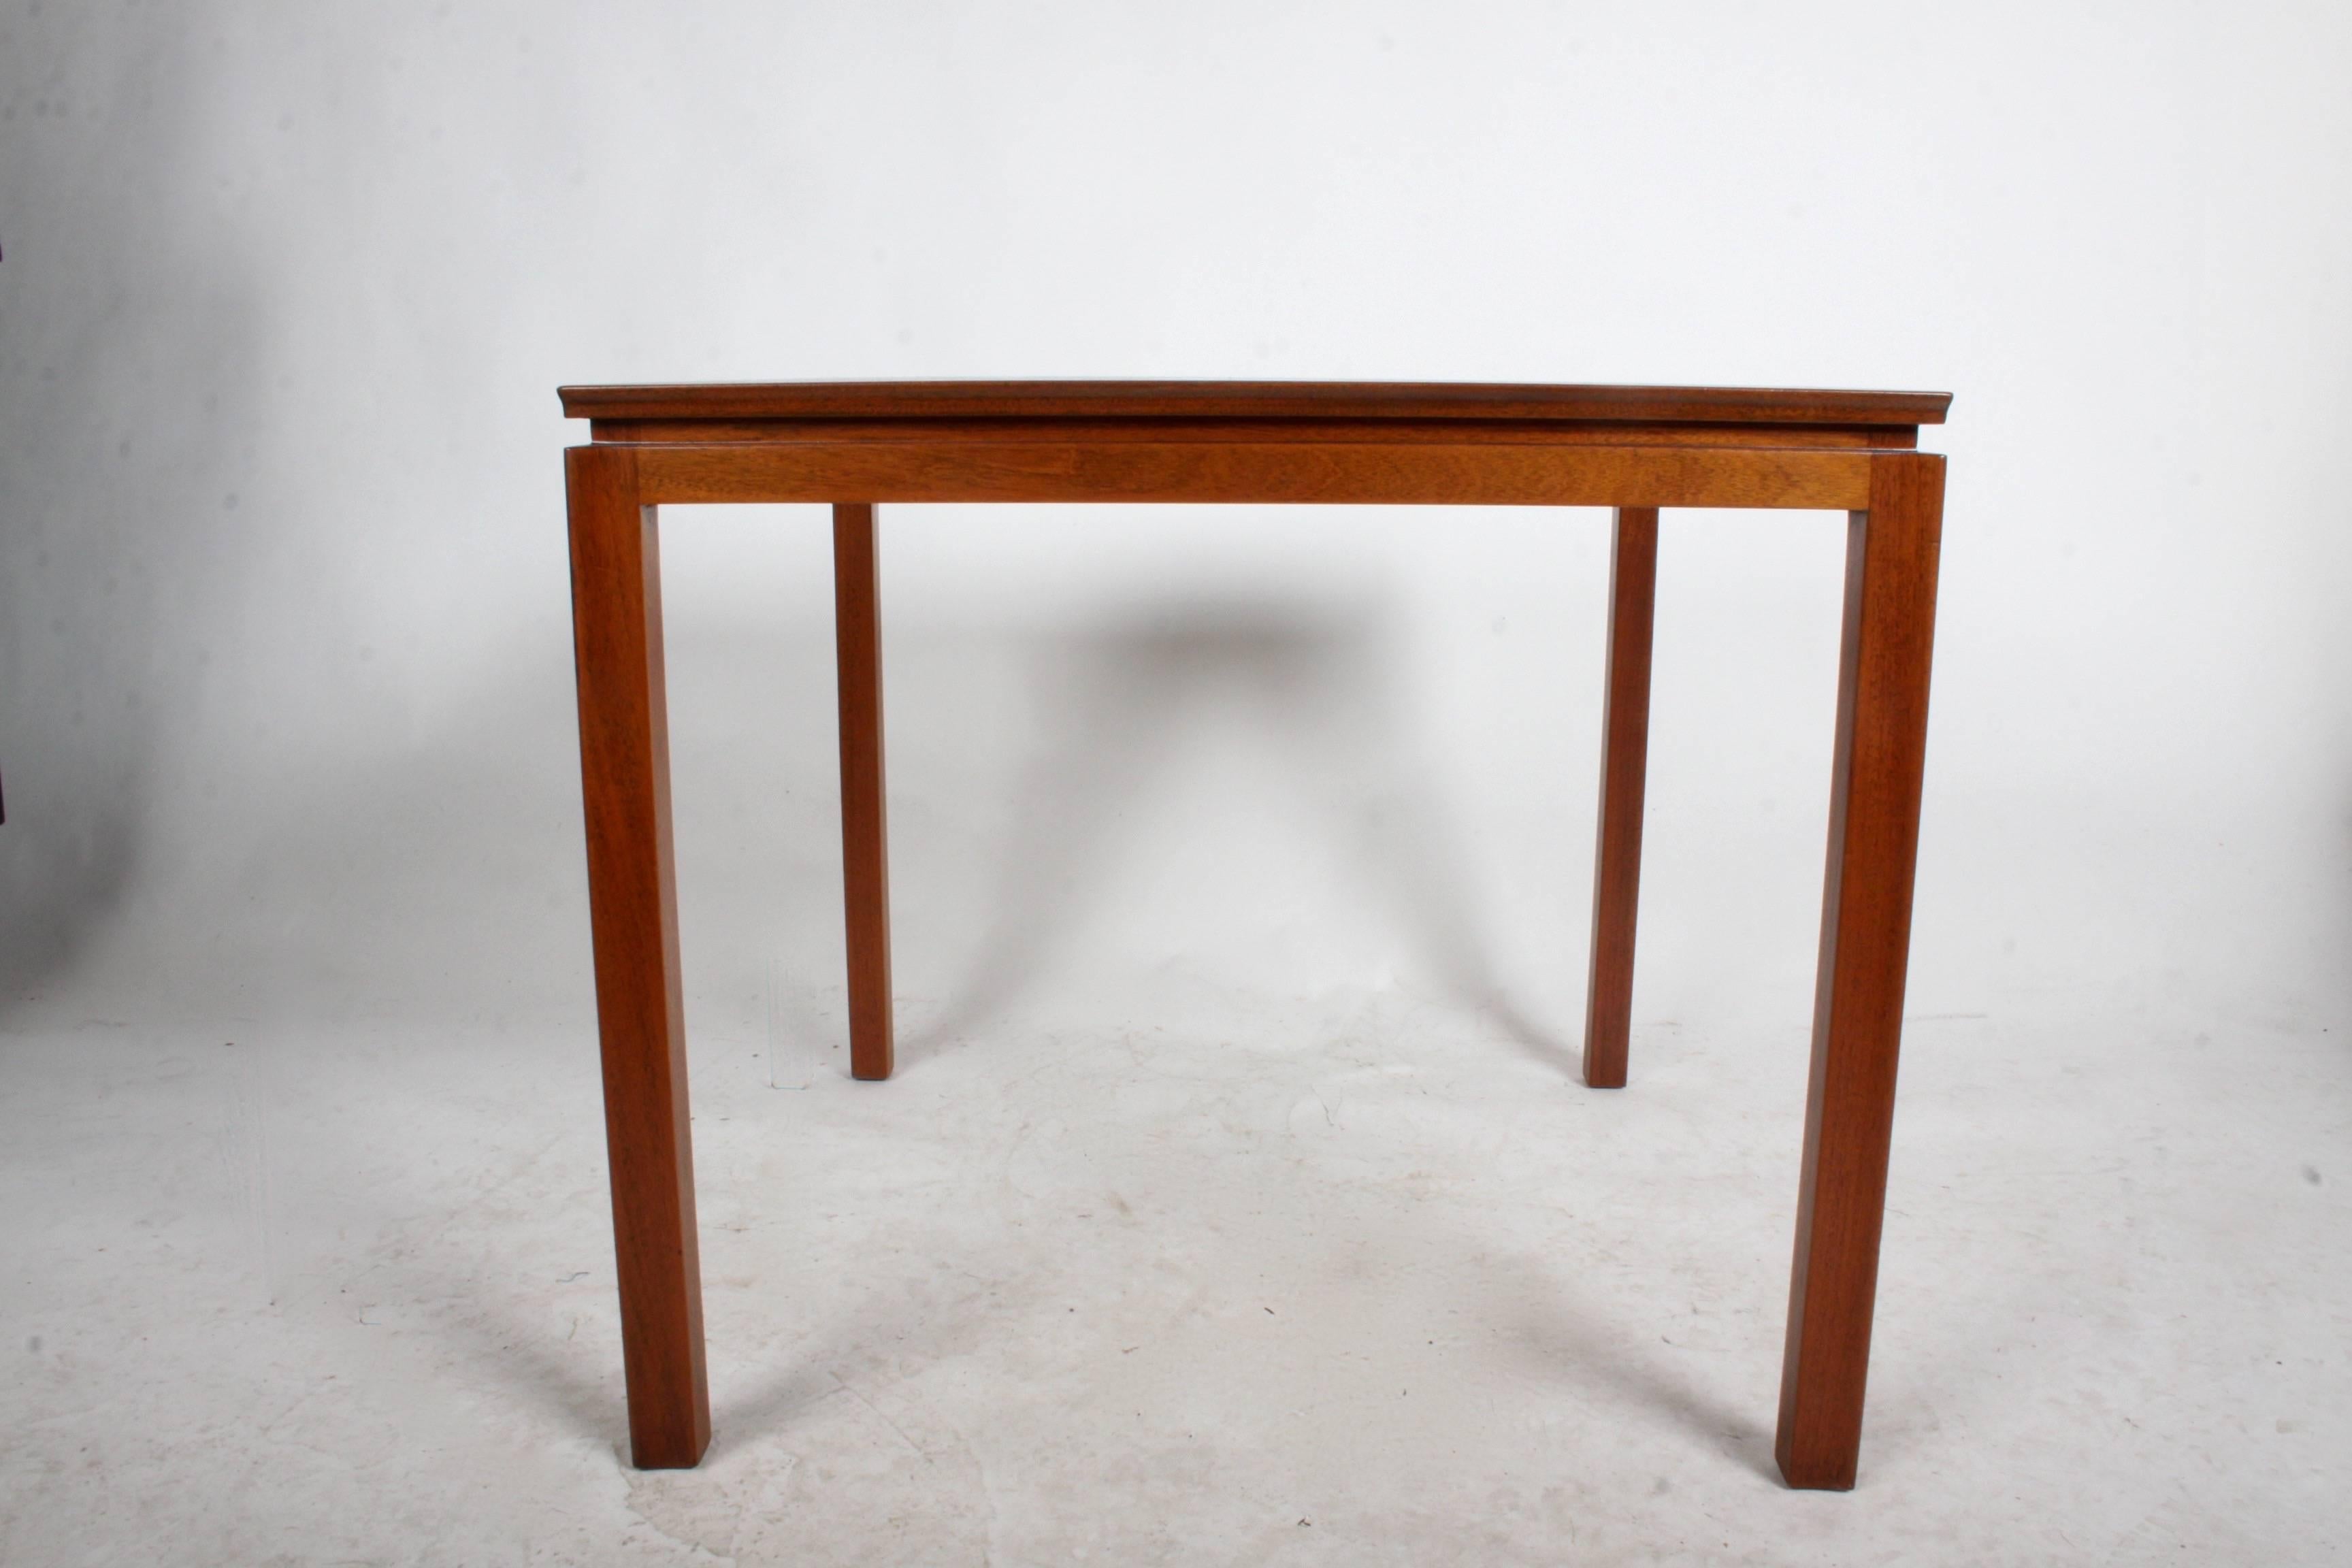 Vintage 1950s Edward Wormley for Dunbar mahogany game table refinished.